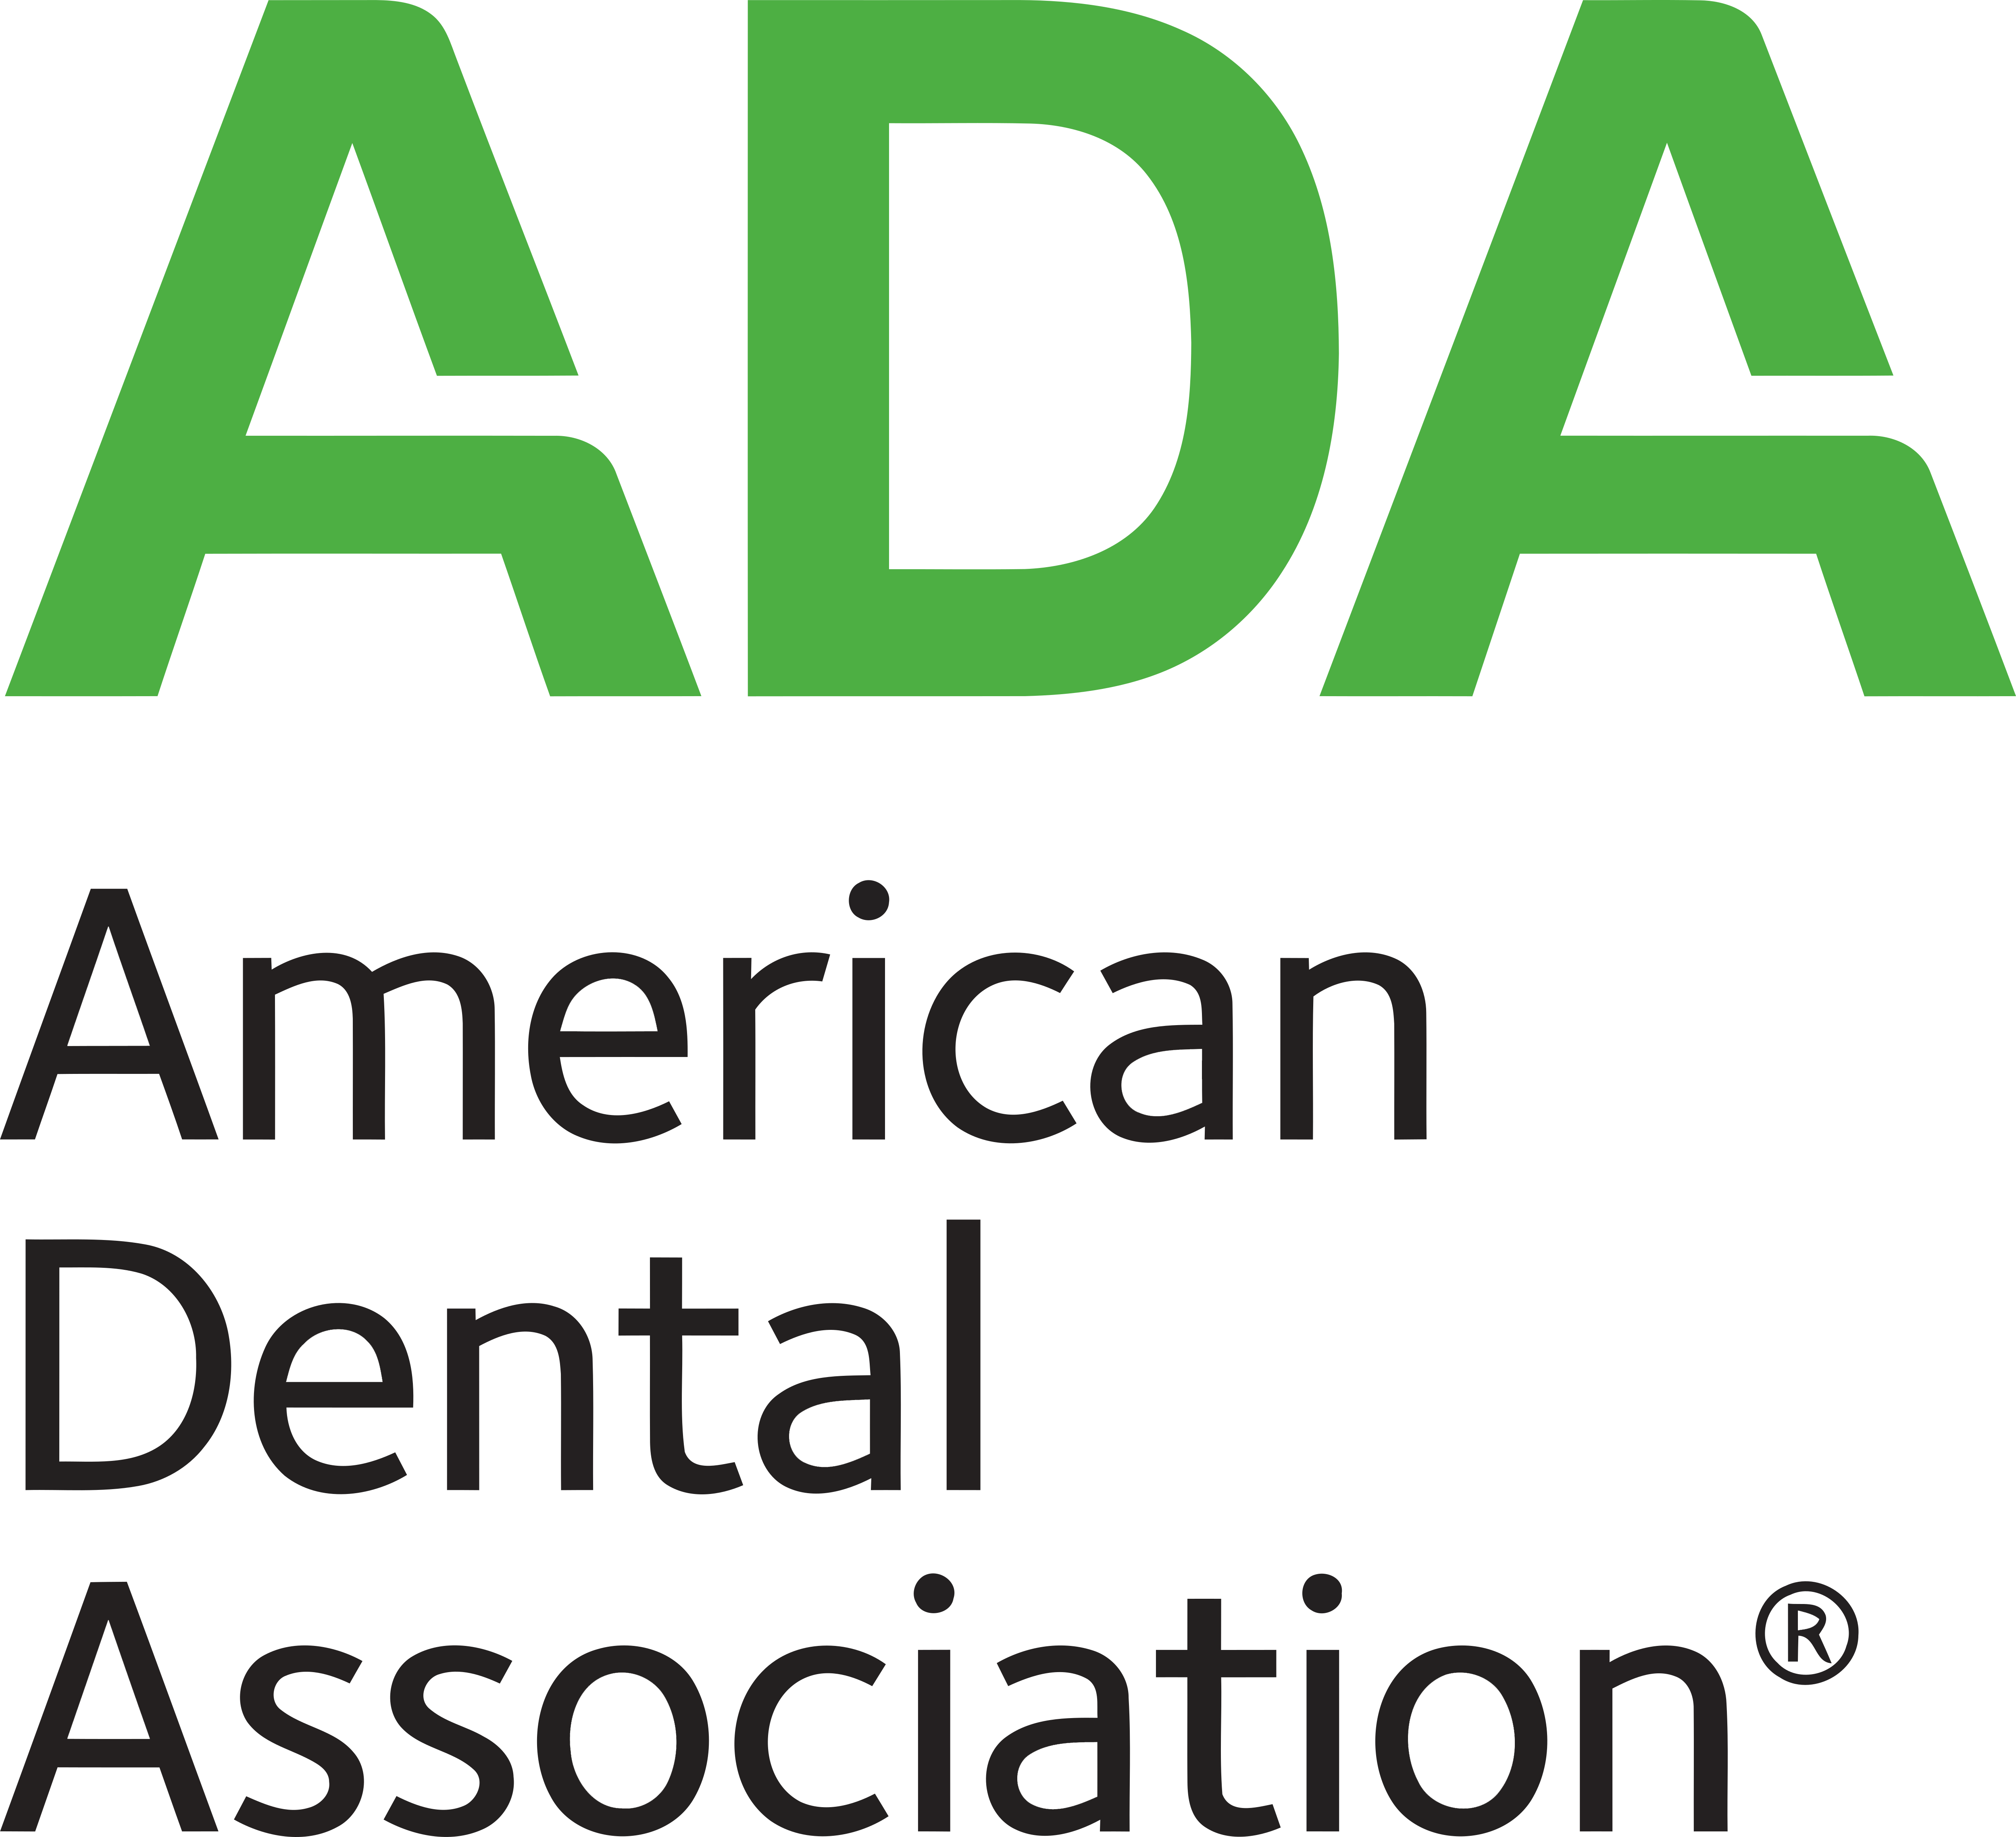 Logo of the American Dental Association in blue and green, with the acronym 'ADA' prominently above the full association name with registration mark.